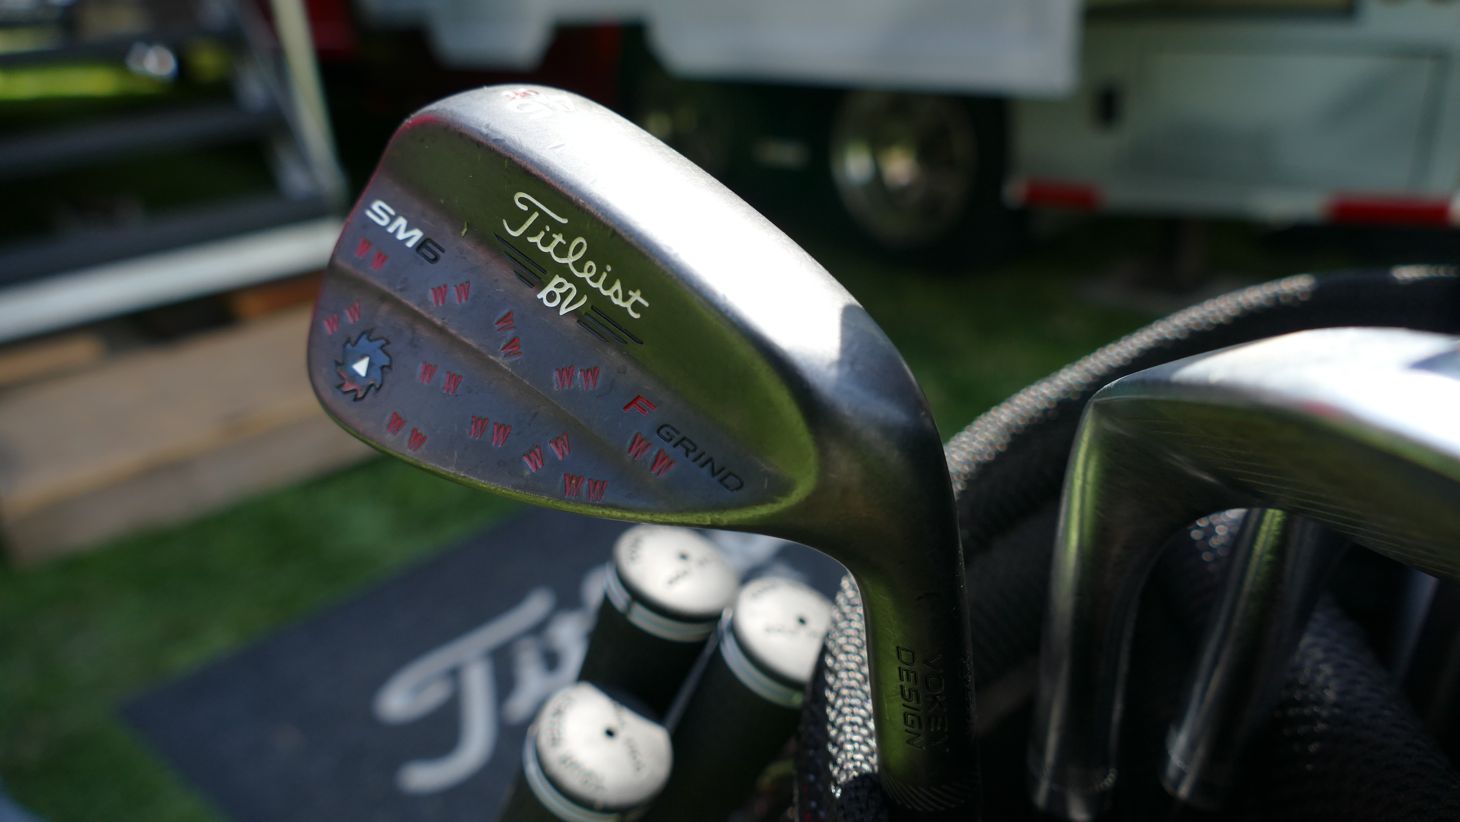 And here’s a closer look at one of his Vokey...